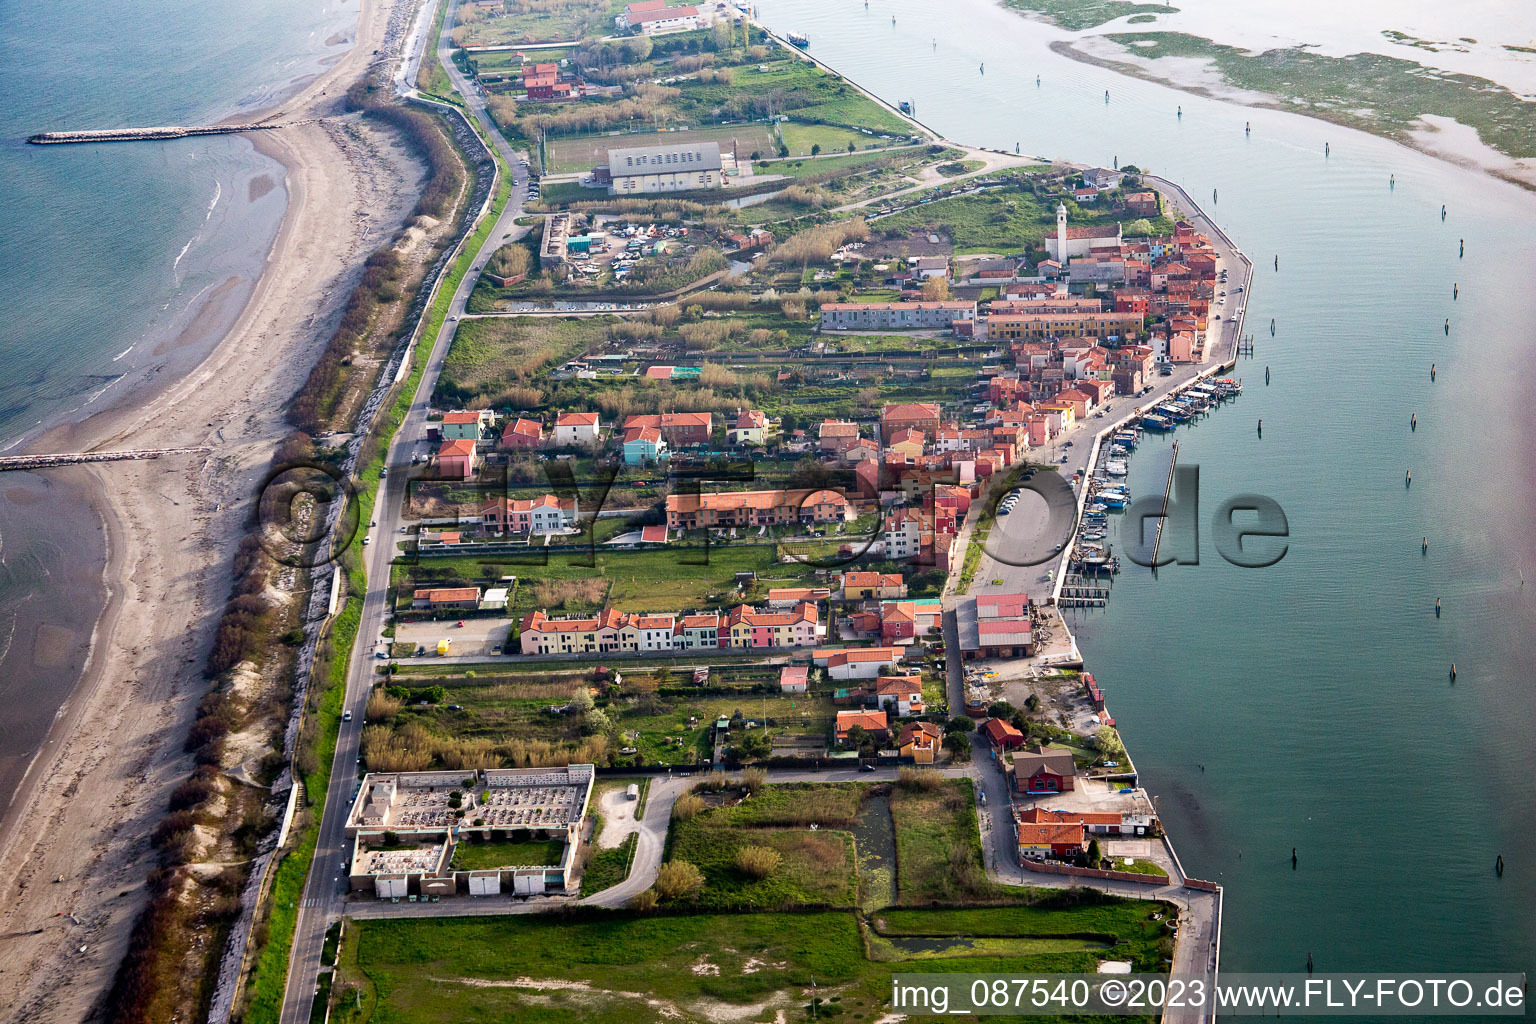 San Pietro in Volta in the state Veneto, Italy seen from above